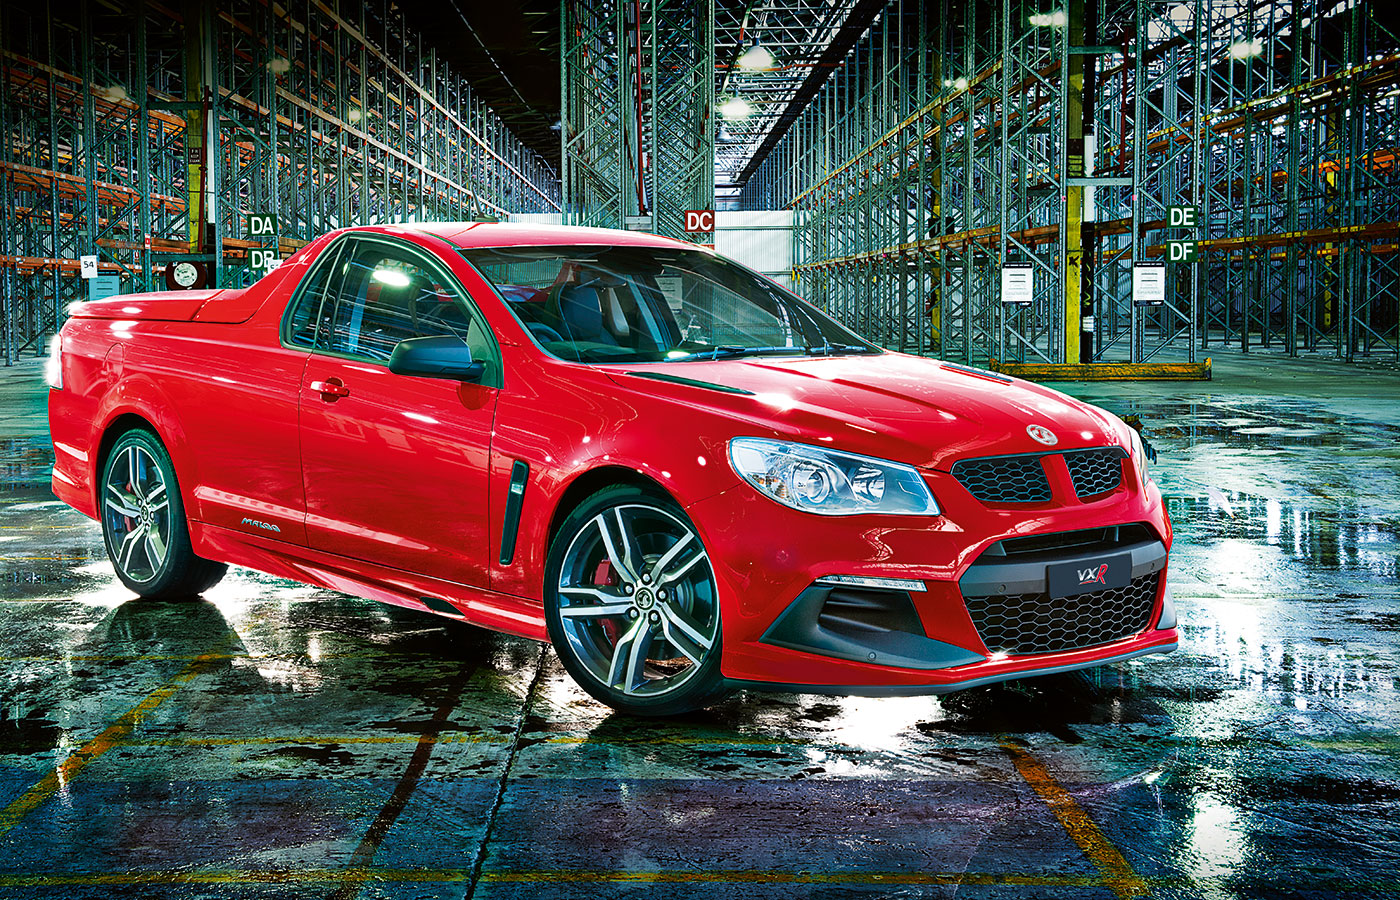 Amazing Vauxhall Vxr8 Maloo Pictures & Backgrounds